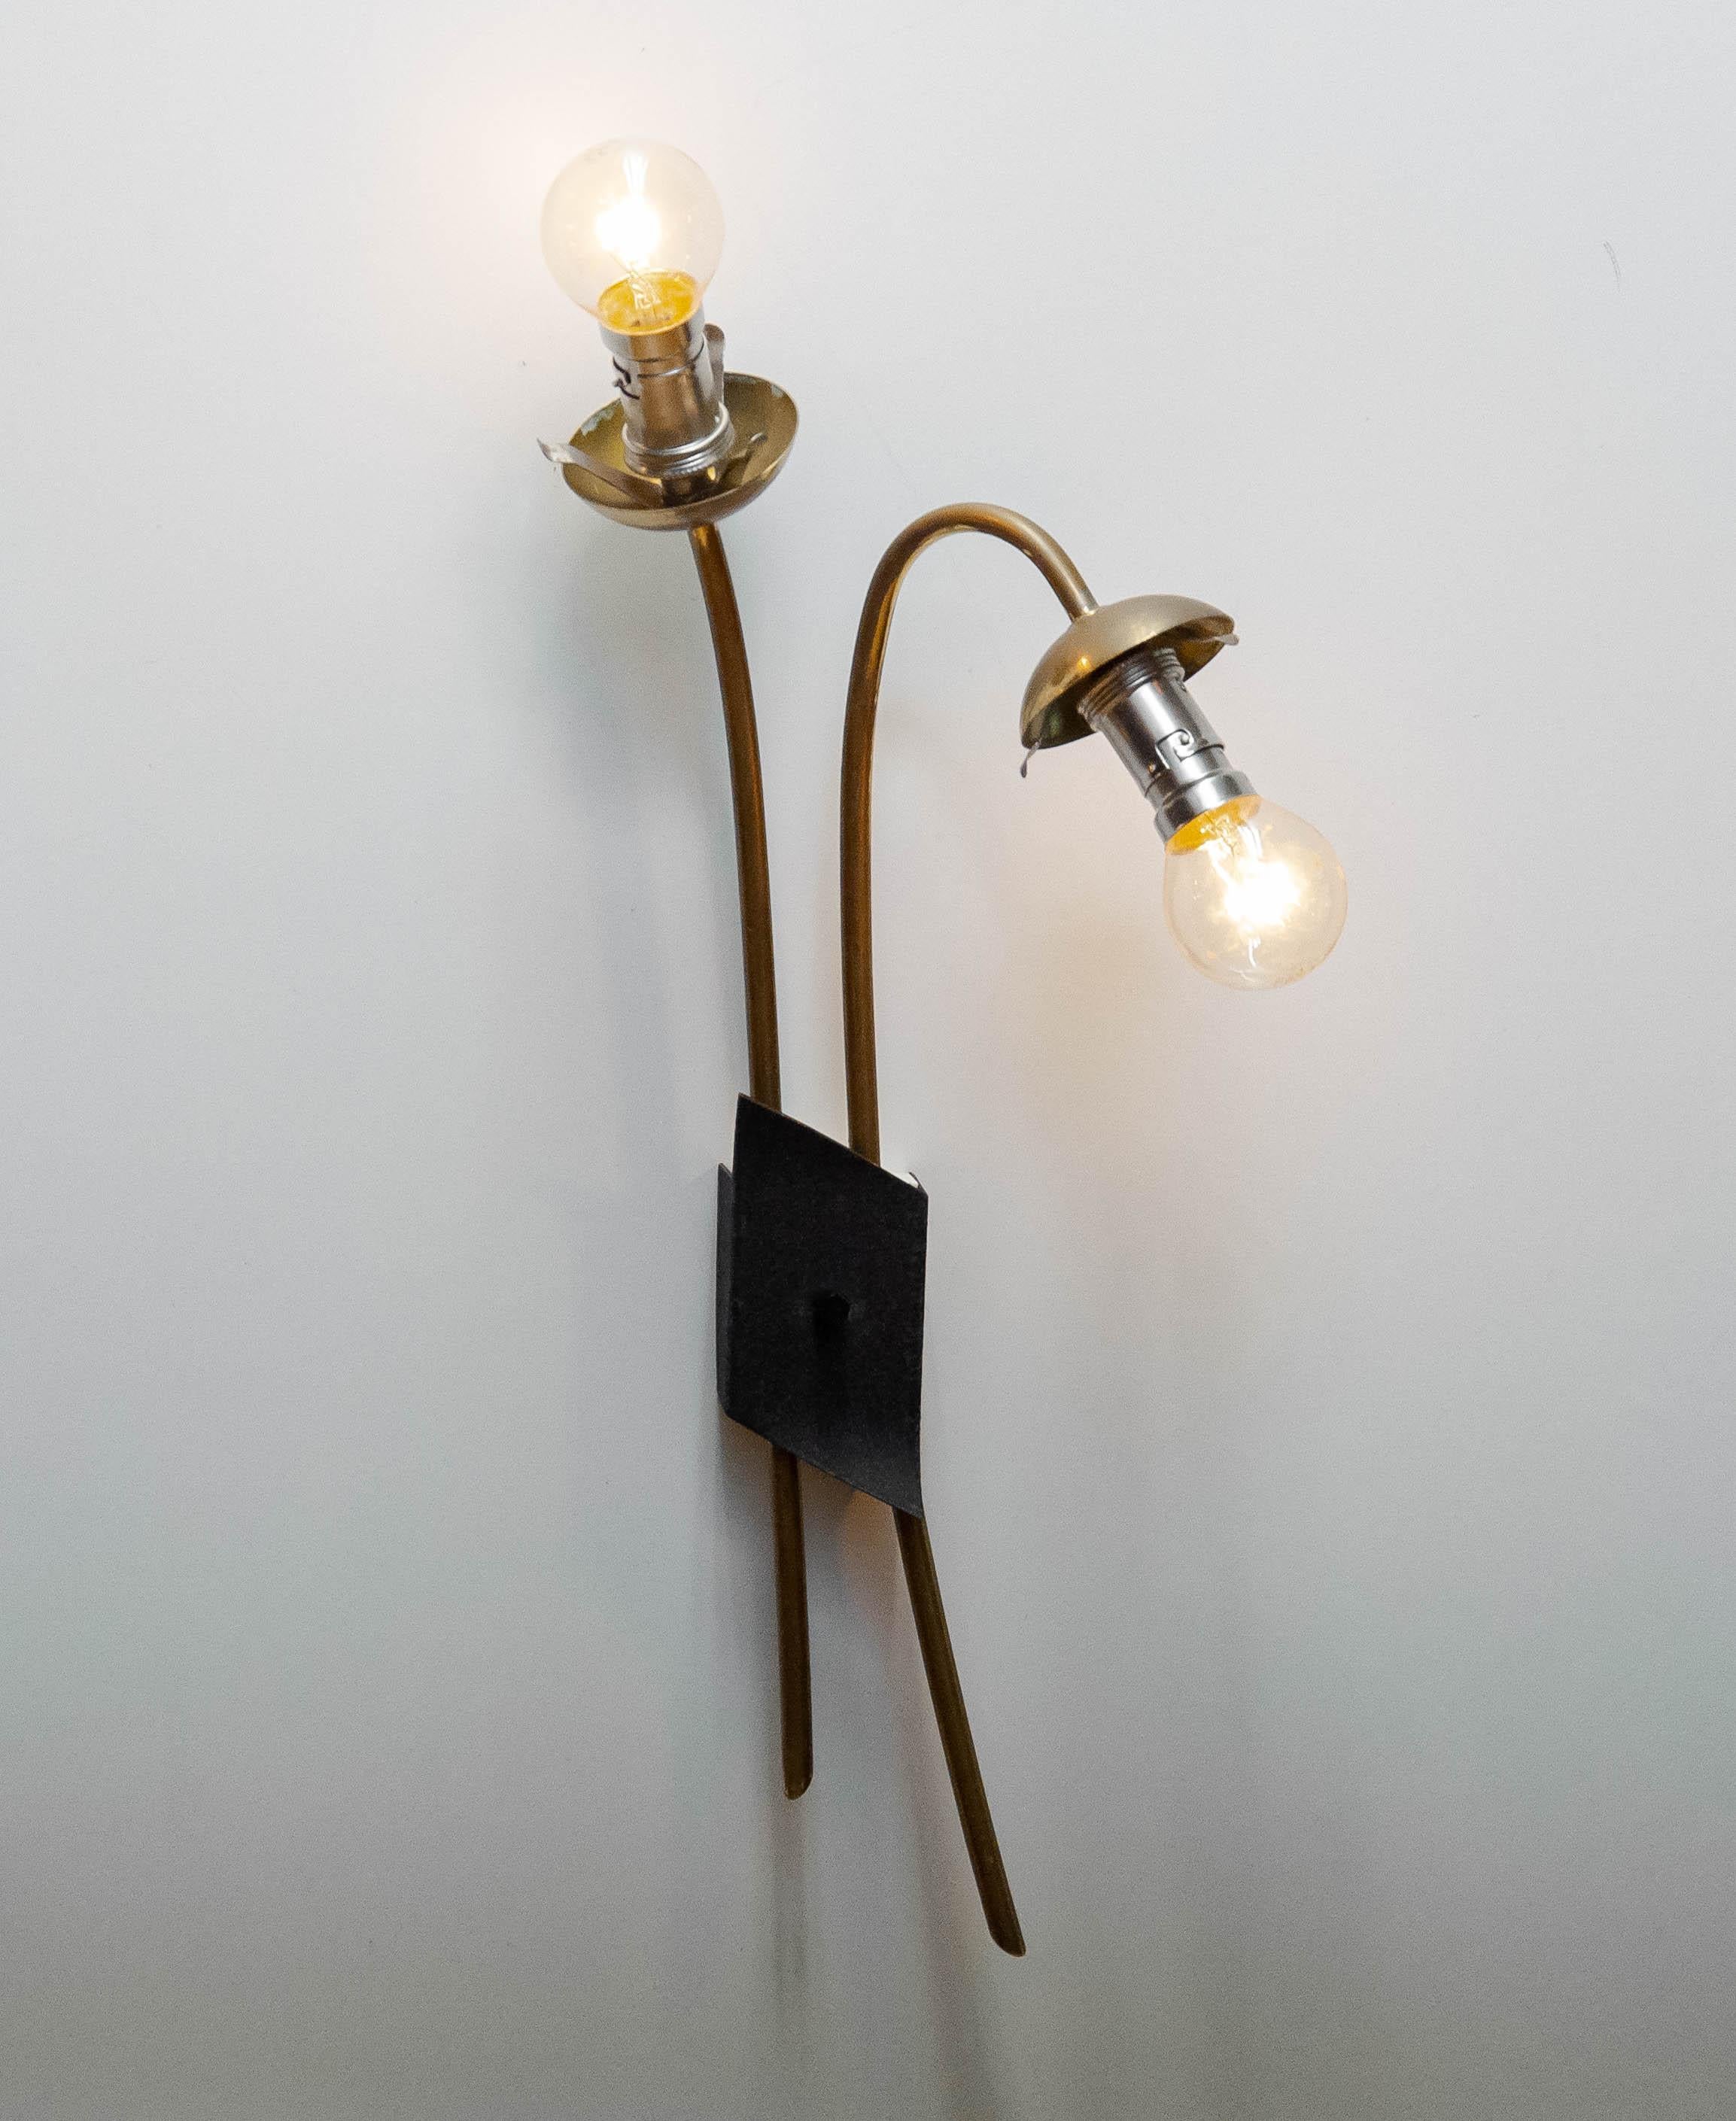 Pair French Brass And Opal Wall Lights / Sconces By Maison Lunel From The 1950s For Sale 5